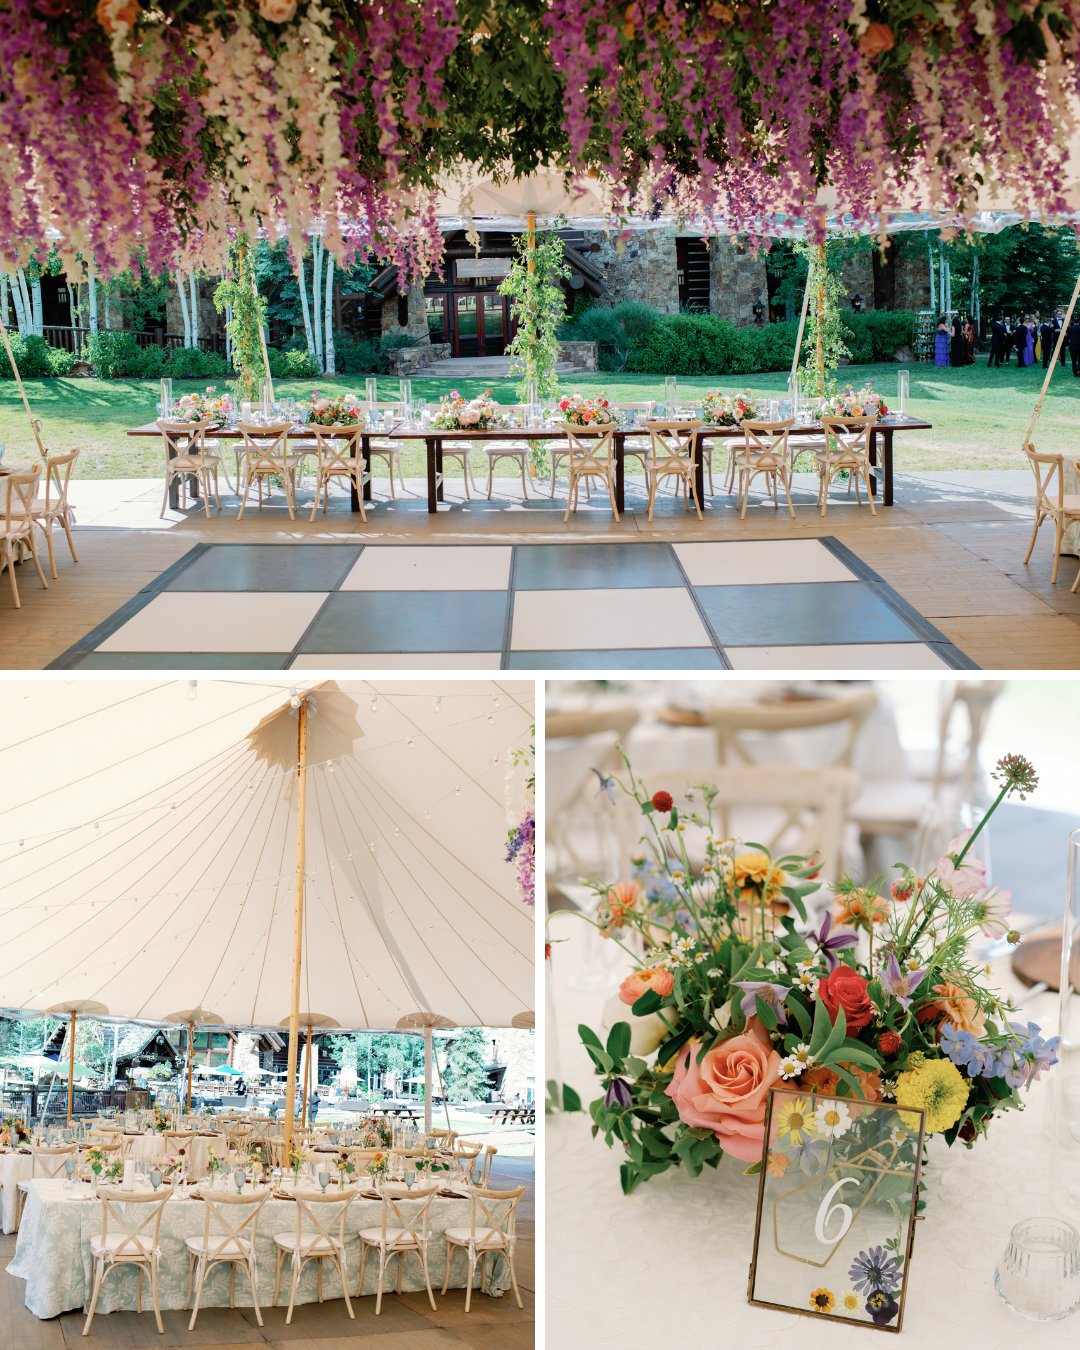 overhead floral installation, inside tent, table floral arrangements with table number sign